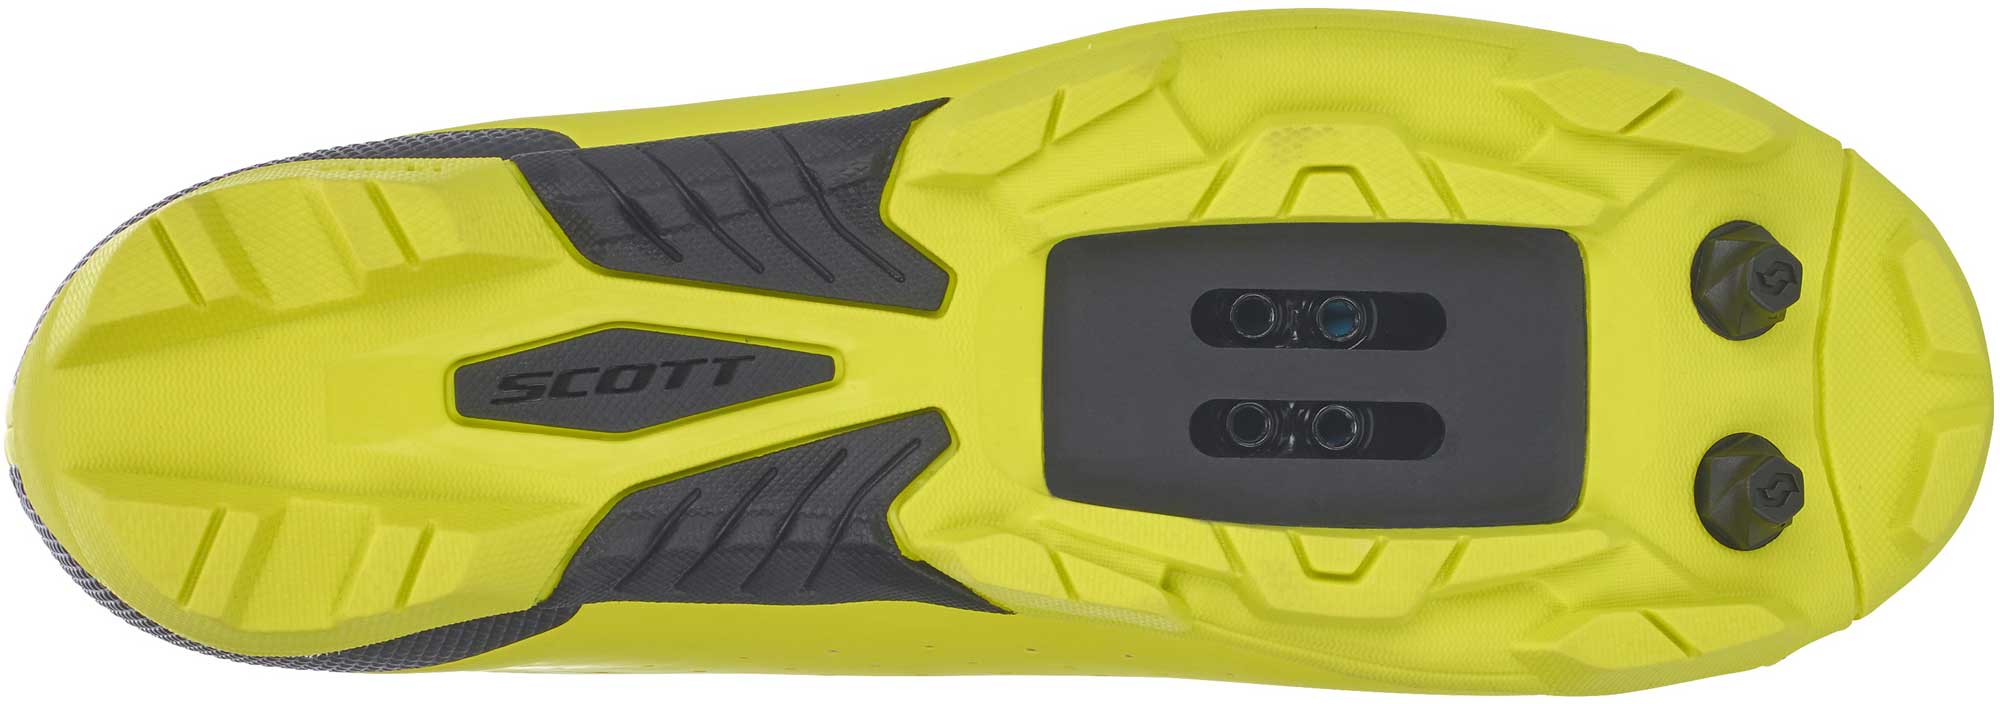 Juniors’ cycling shoes